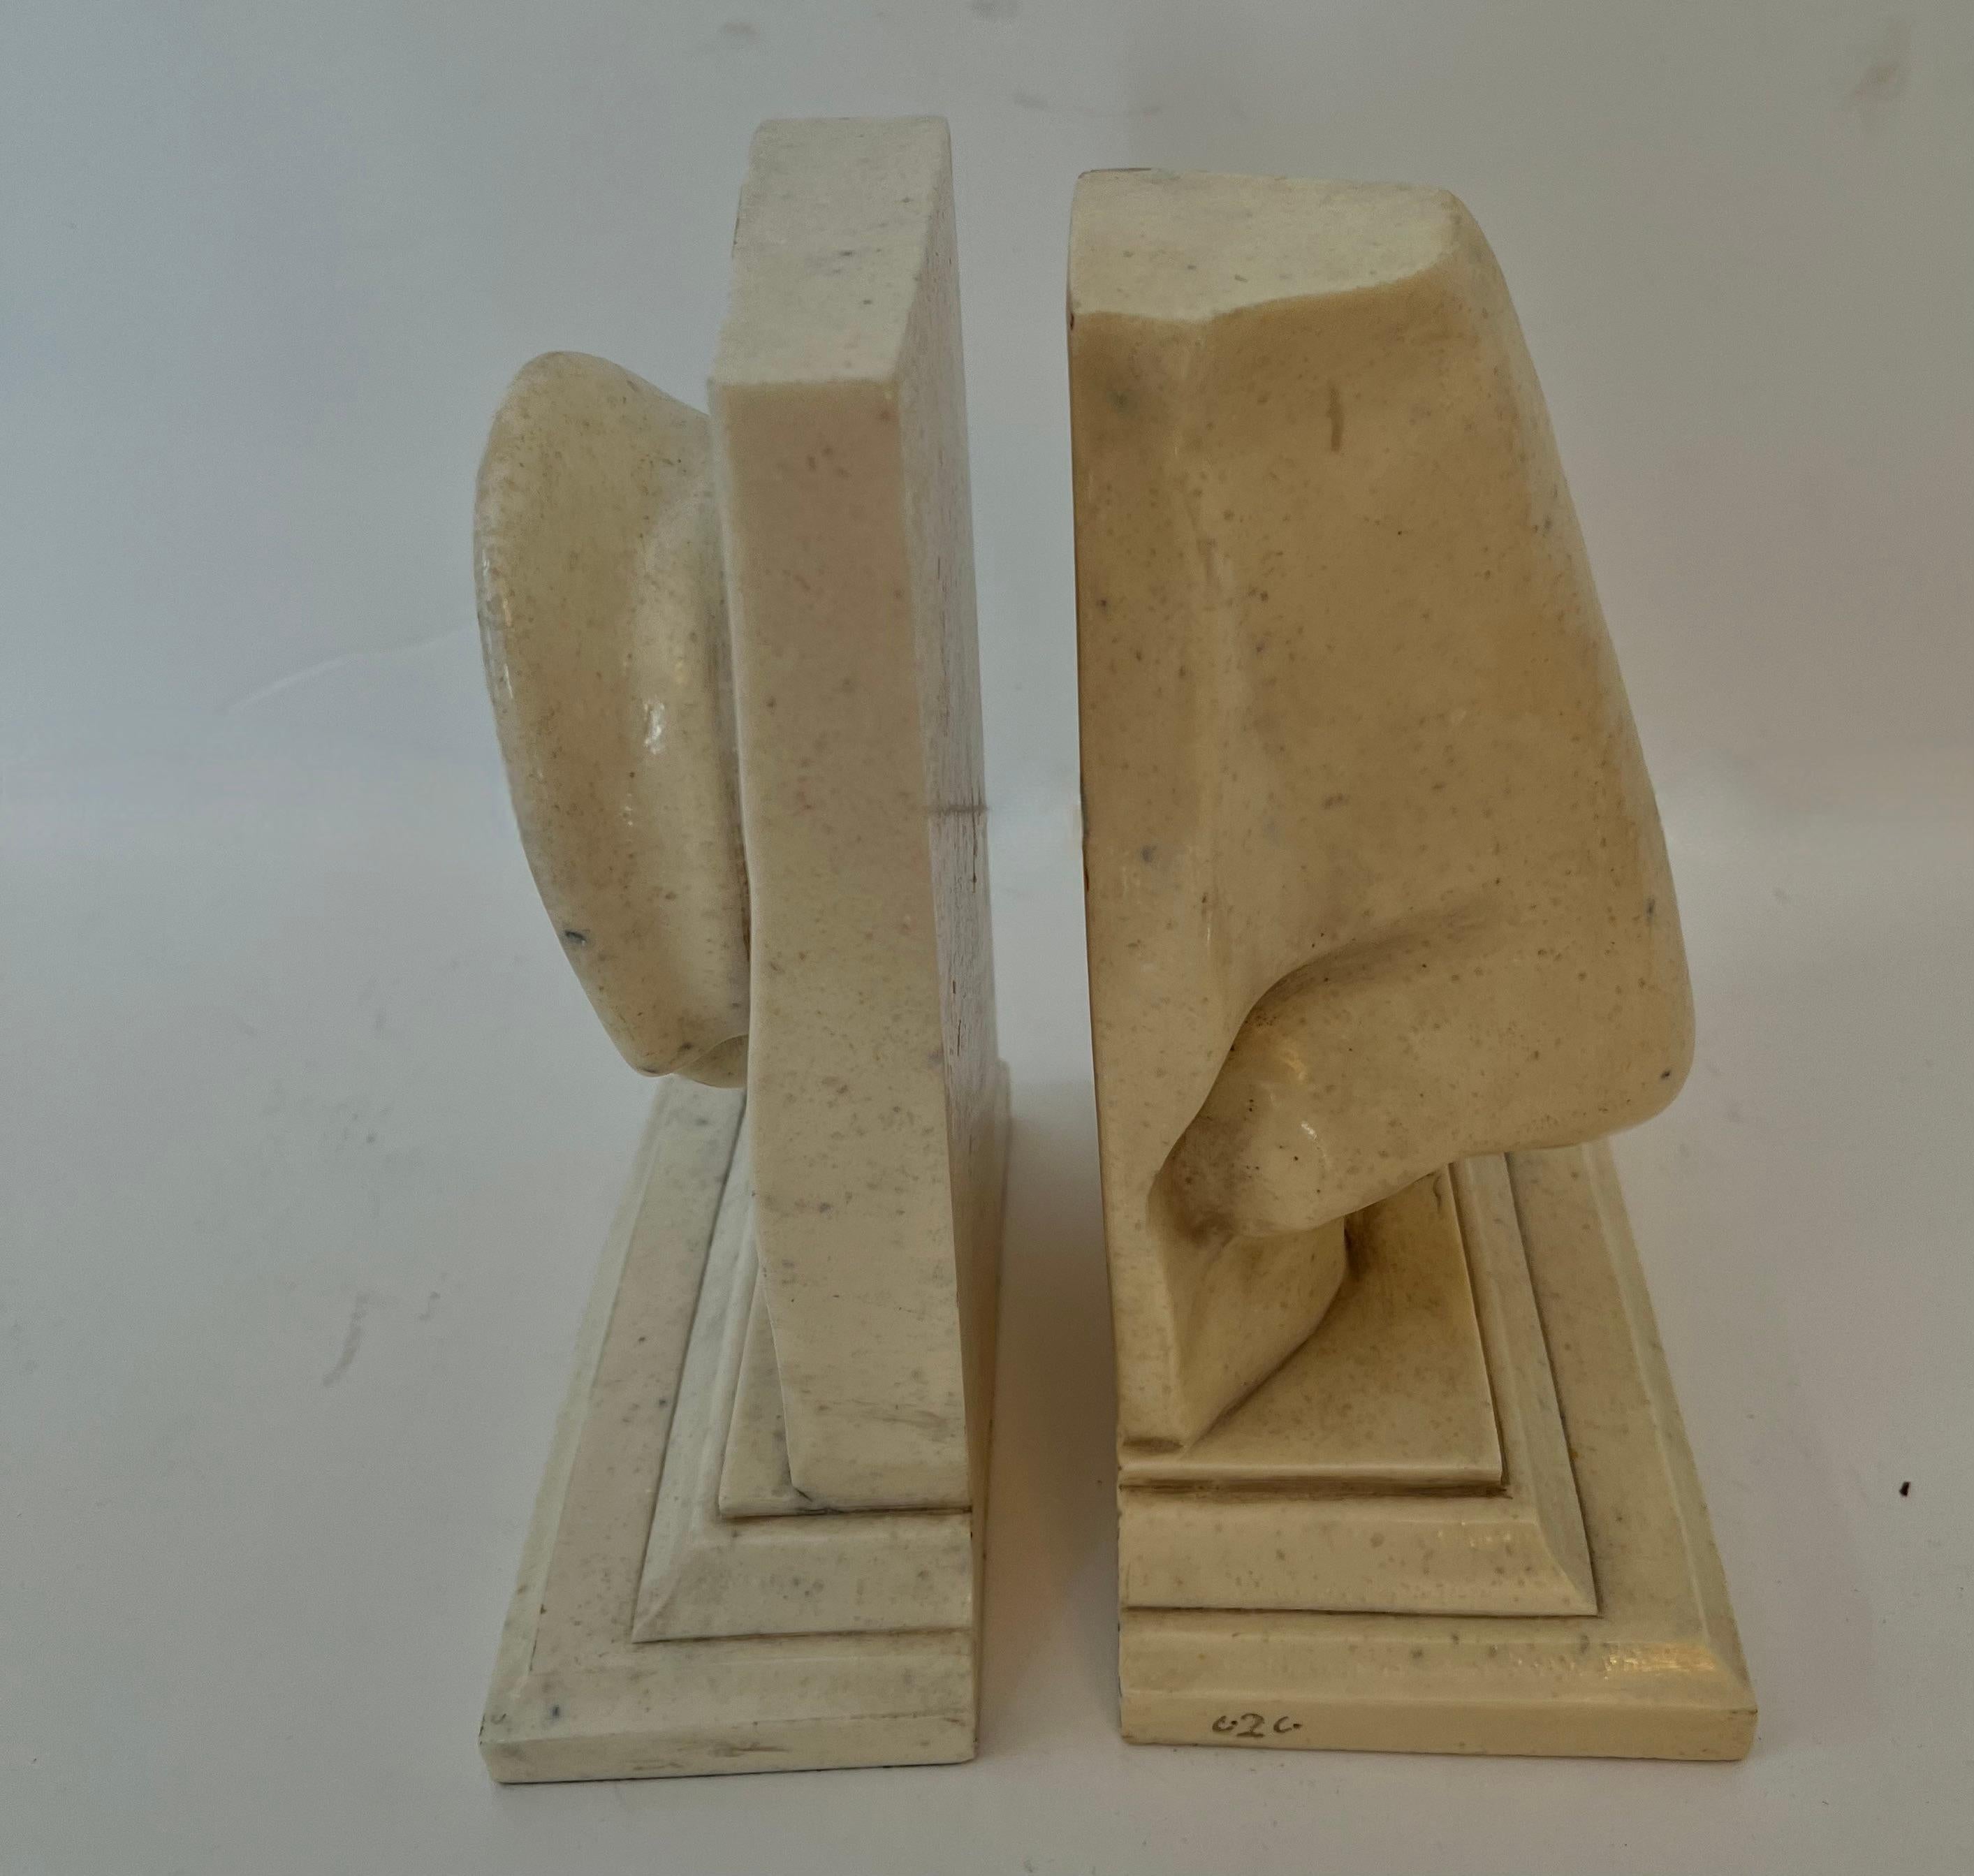 Molded Pair of C2C Designs, a Resin Based Sculptural Ear and Nose Bookend Set For Sale